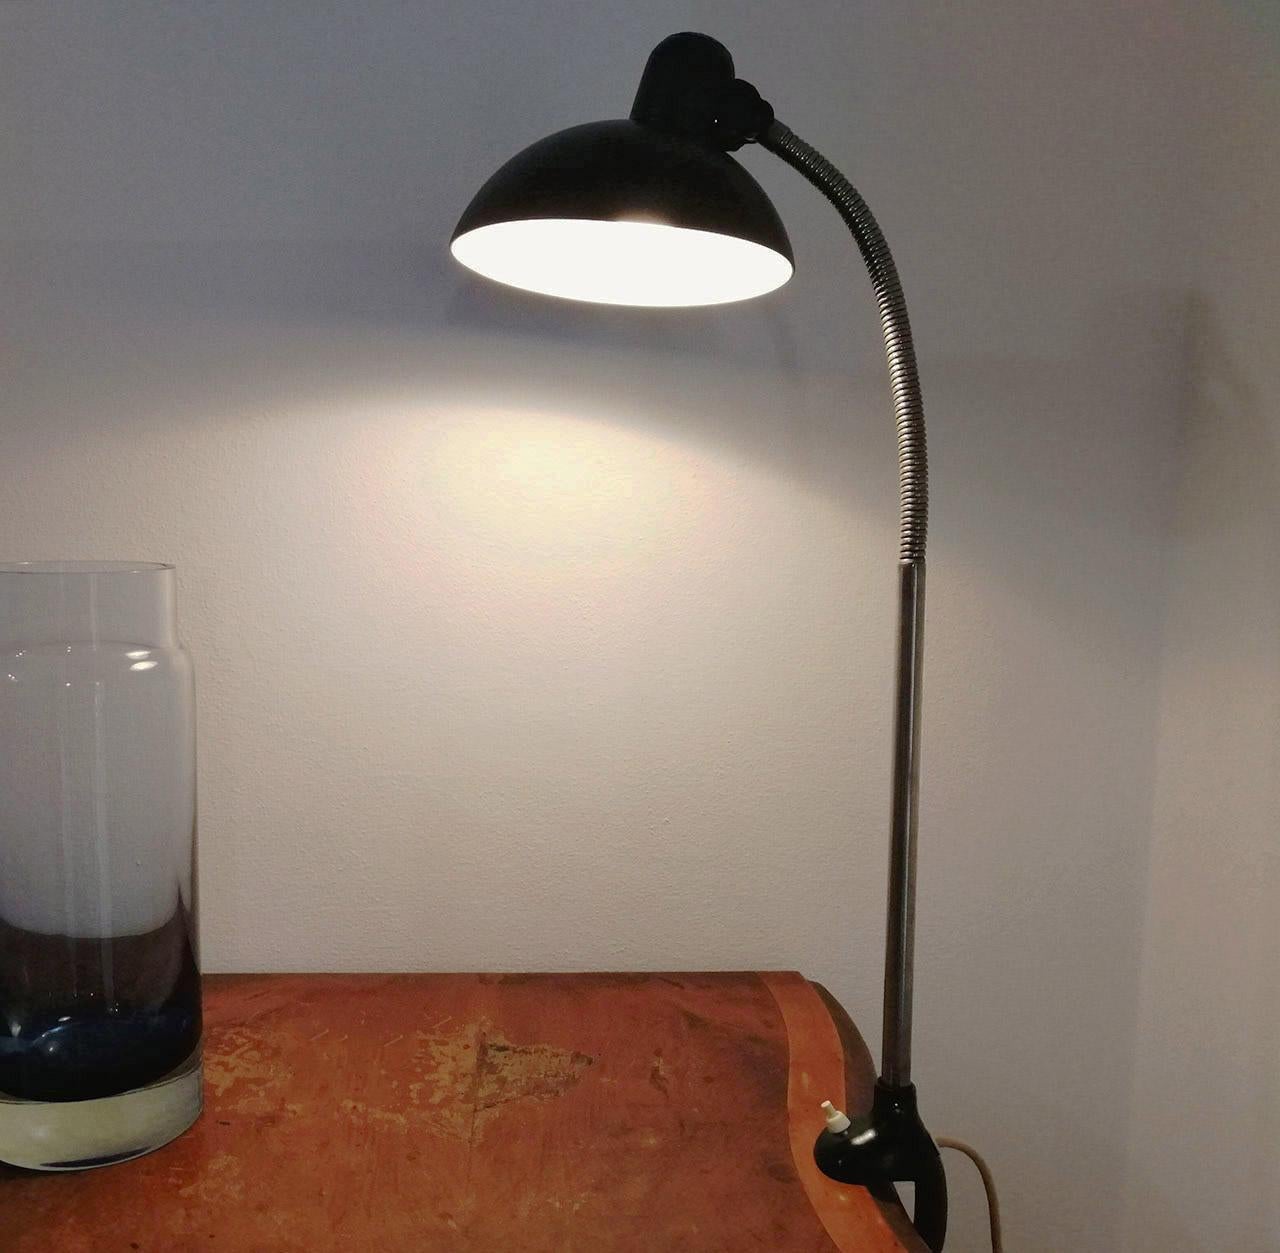 Bauhaus Kaiser Idell 6740 Adjustable Table Lamp by Christian Dell 1930s For Sale